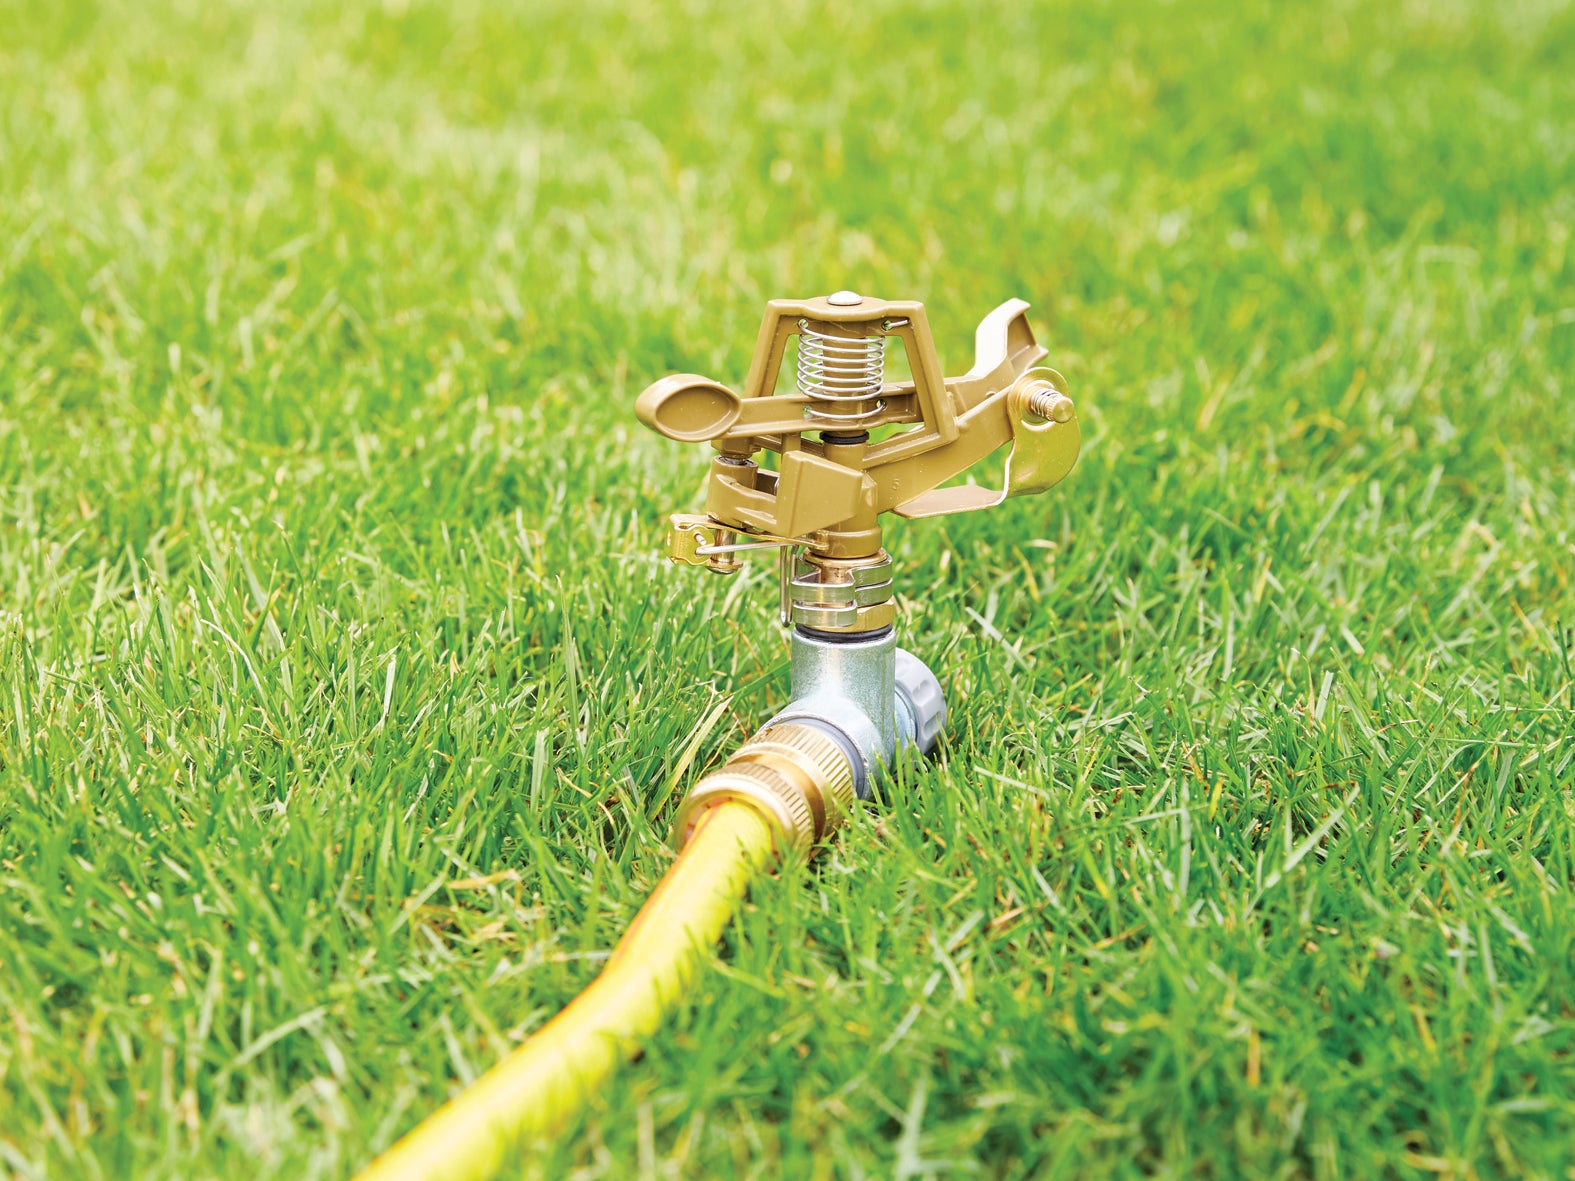 Brass Impact Sprinkler Head, 360 Degree Automatic Rotation 15m Range  Watering Sprinklers for Yard Lawn Grass Irrigation